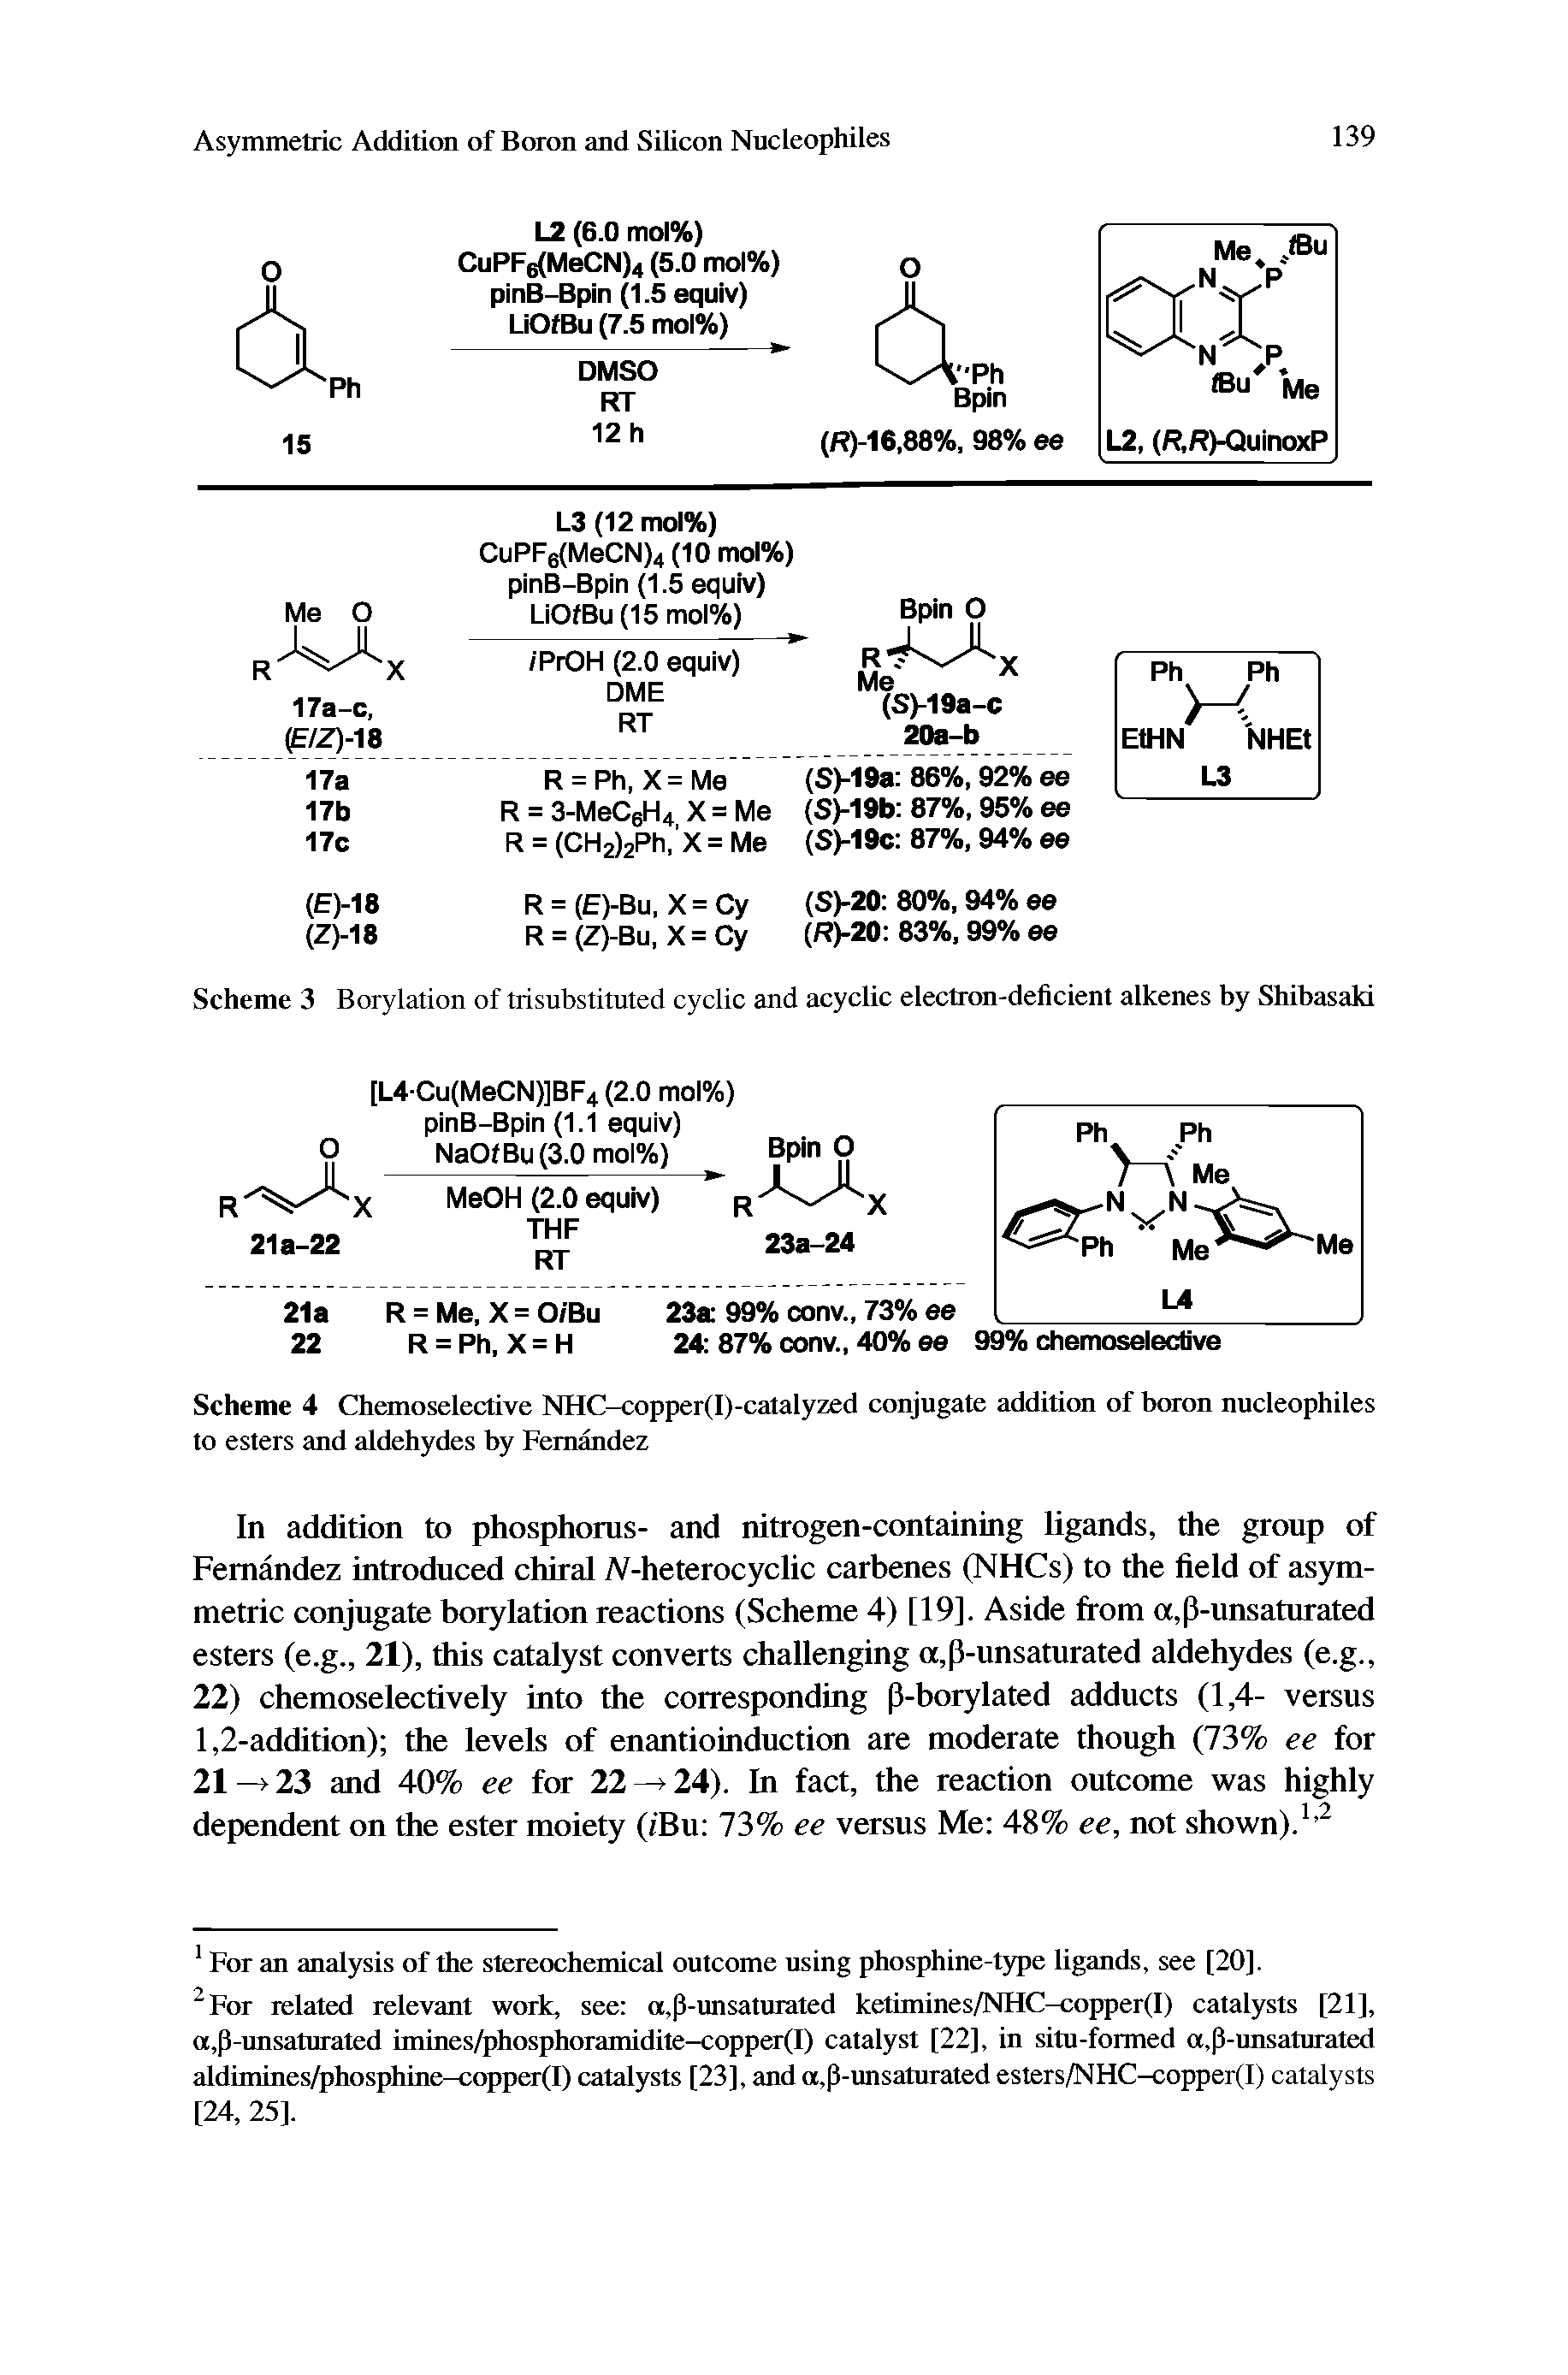 Scheme 4 Chemoselective NHC-copper(I)-calalyzed conjugate addition of boron nucleophiles to esters and aldehydes by Fernandez...